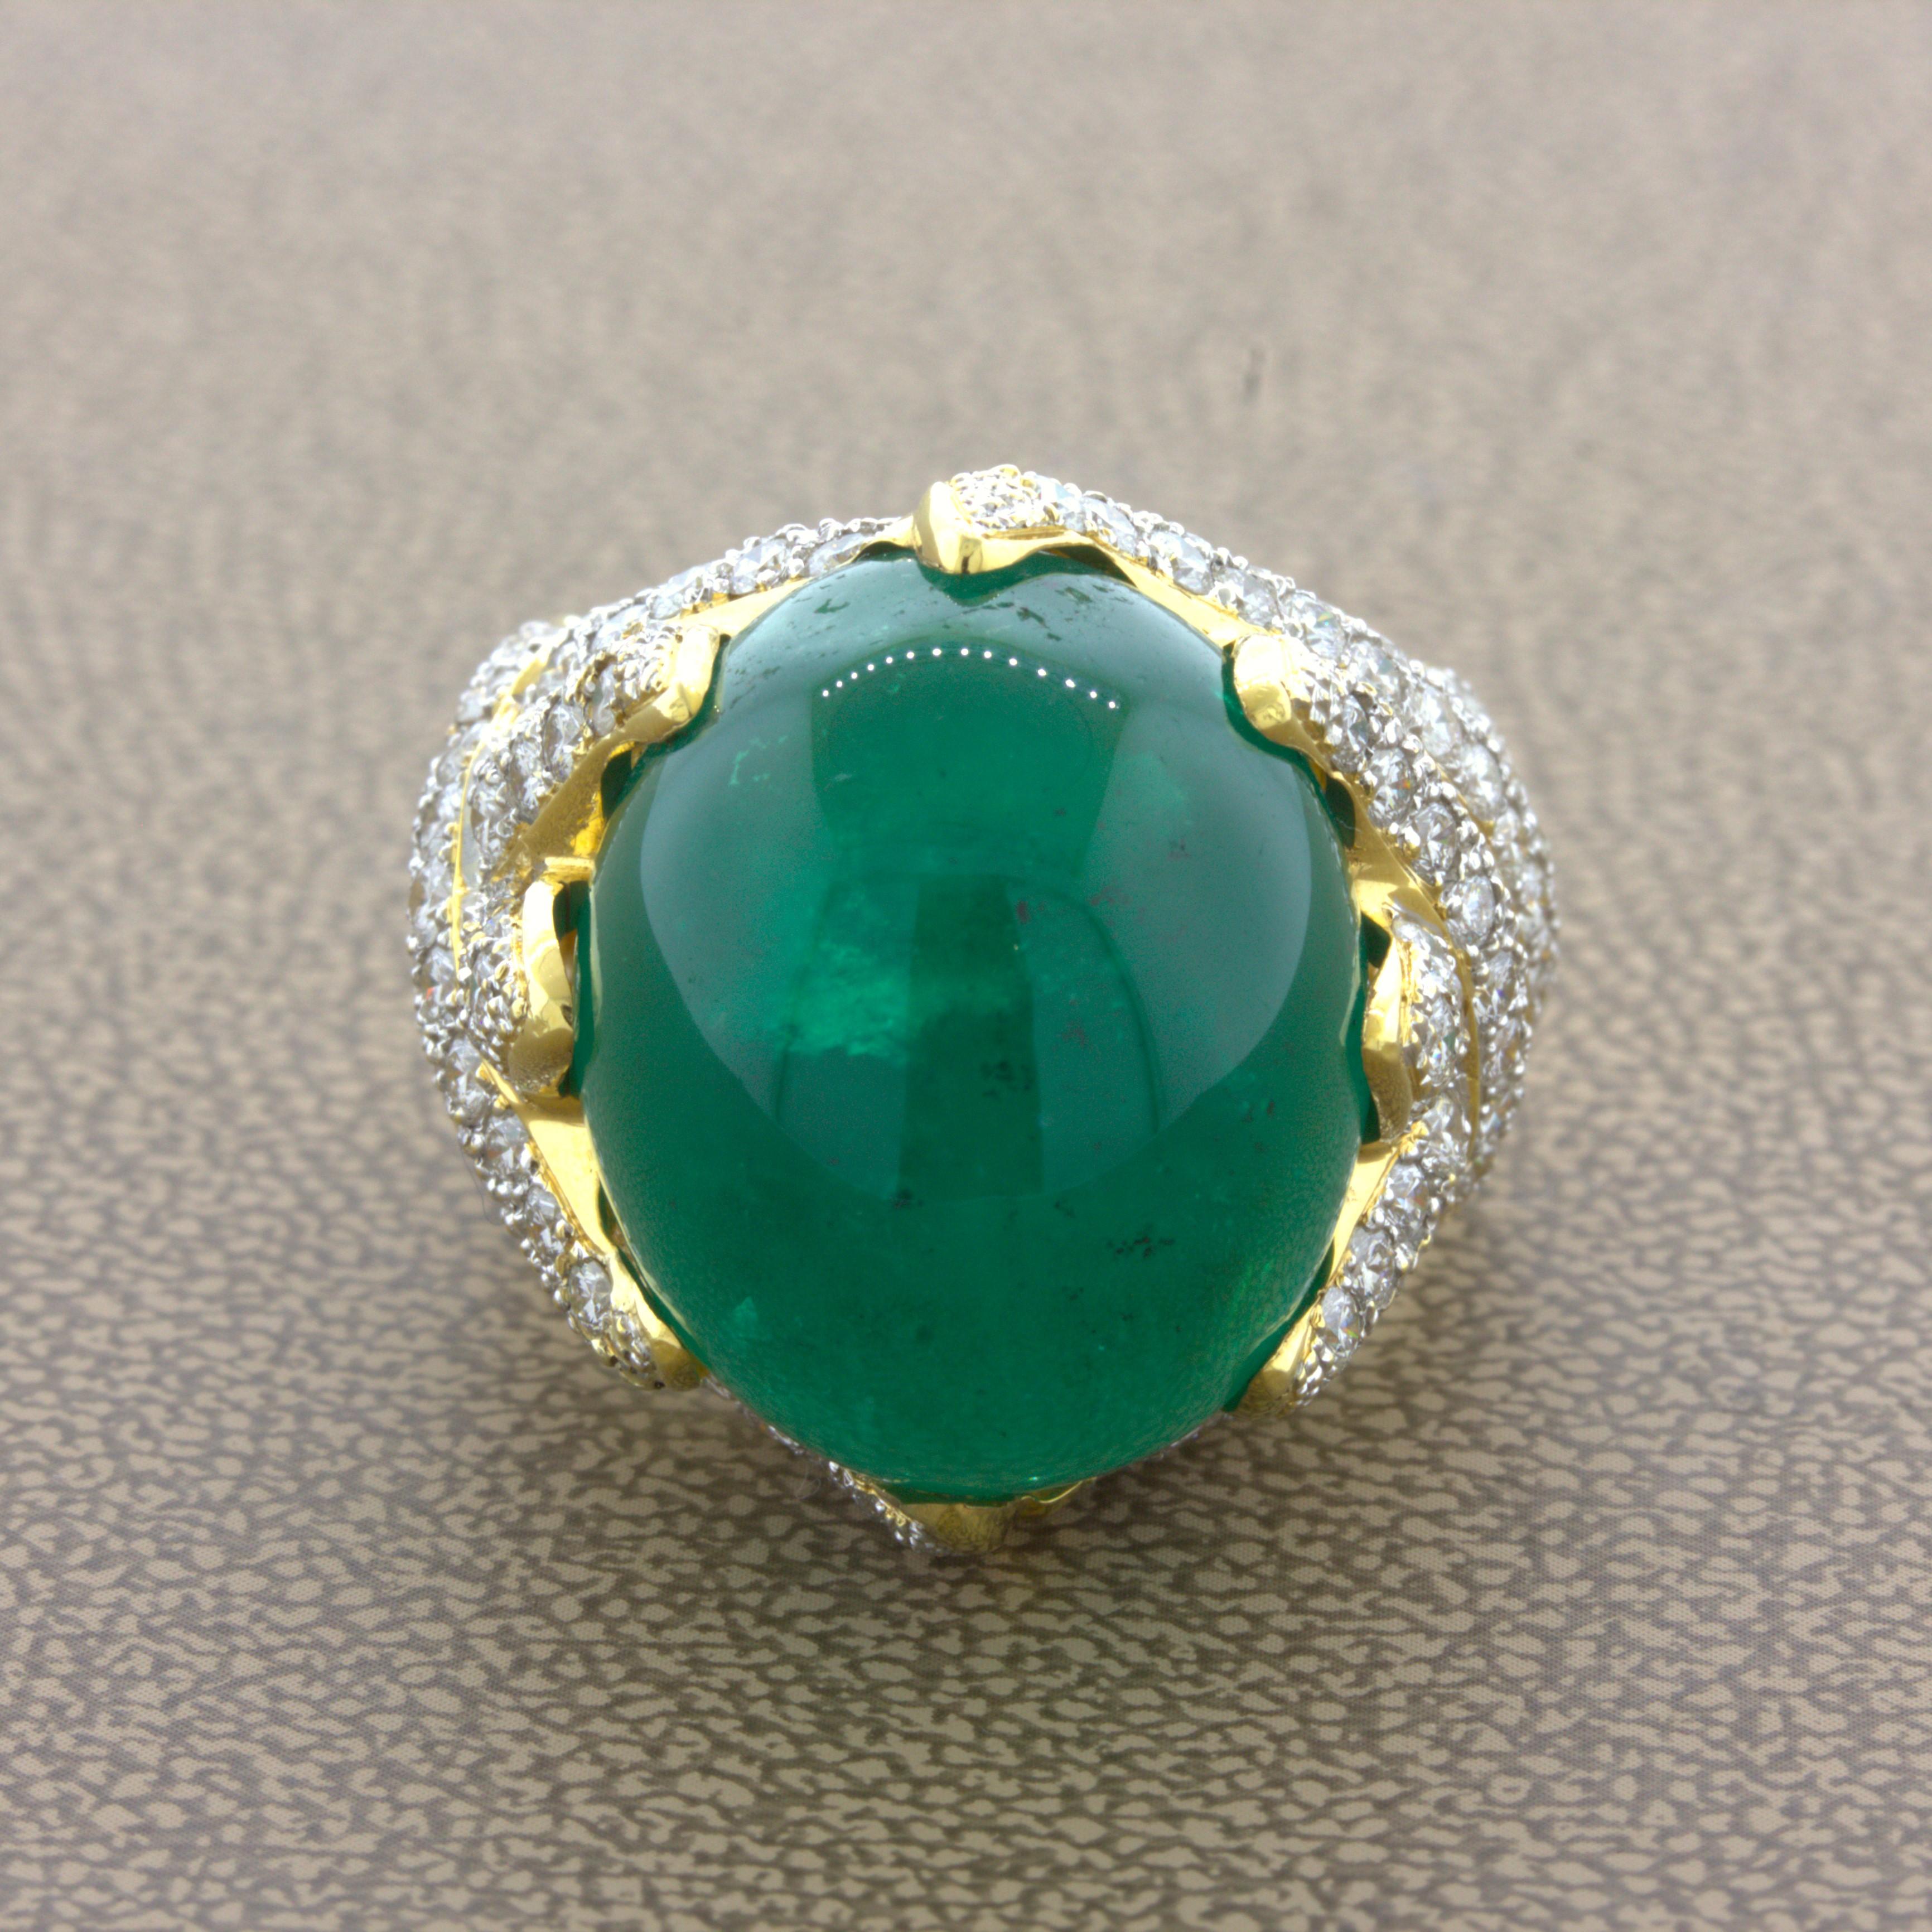 26.67 Carat Colombian Emerald Diamond 18K Yellow Gold Cocktail Ring, AGL Certified

A lovely gem vivid green Colombian emerald takes center stage. It has a rich vibrant color and weighs an impressive 26.67 carats. Adding to that, it is certified by